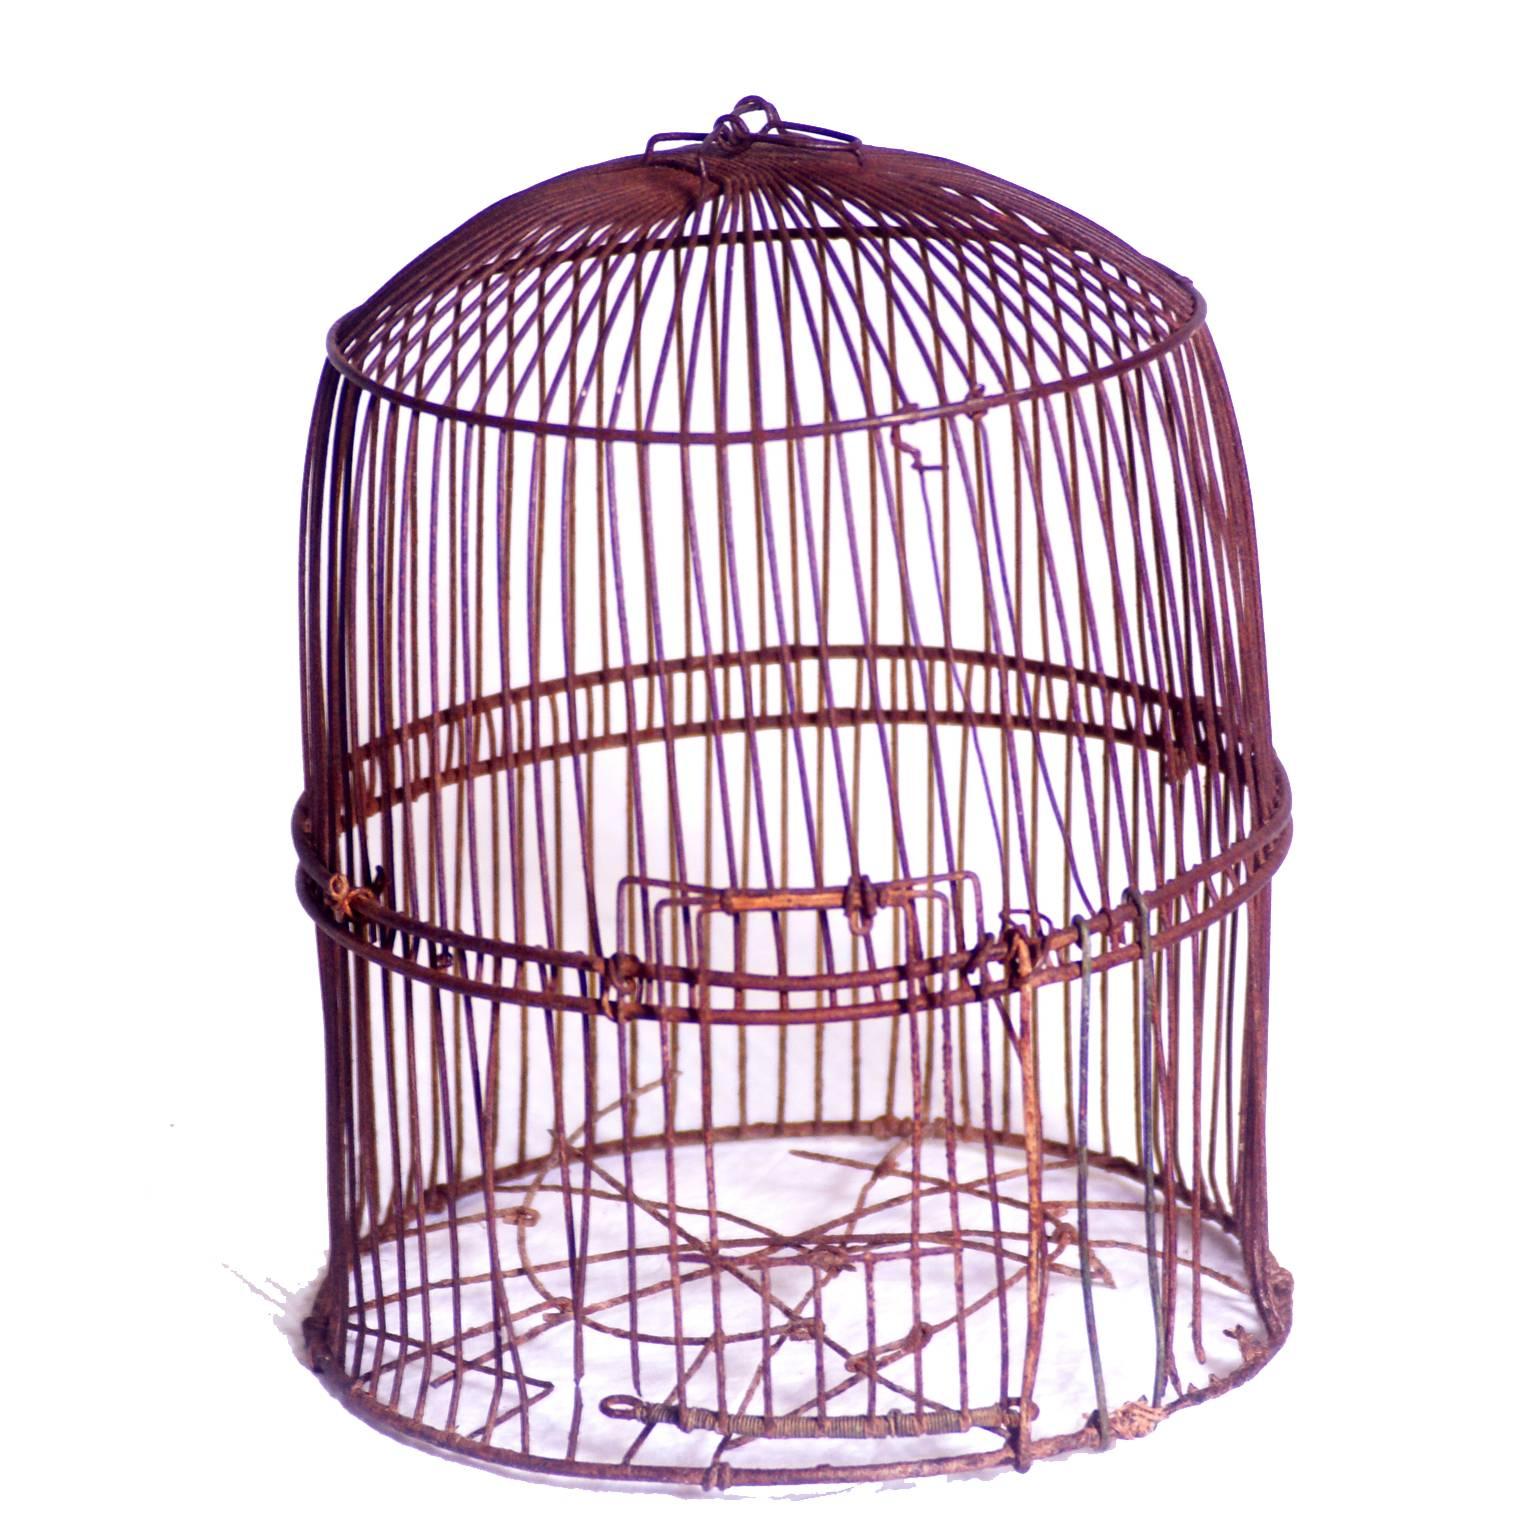 Spanish Six Wire Bird Cages For Sale